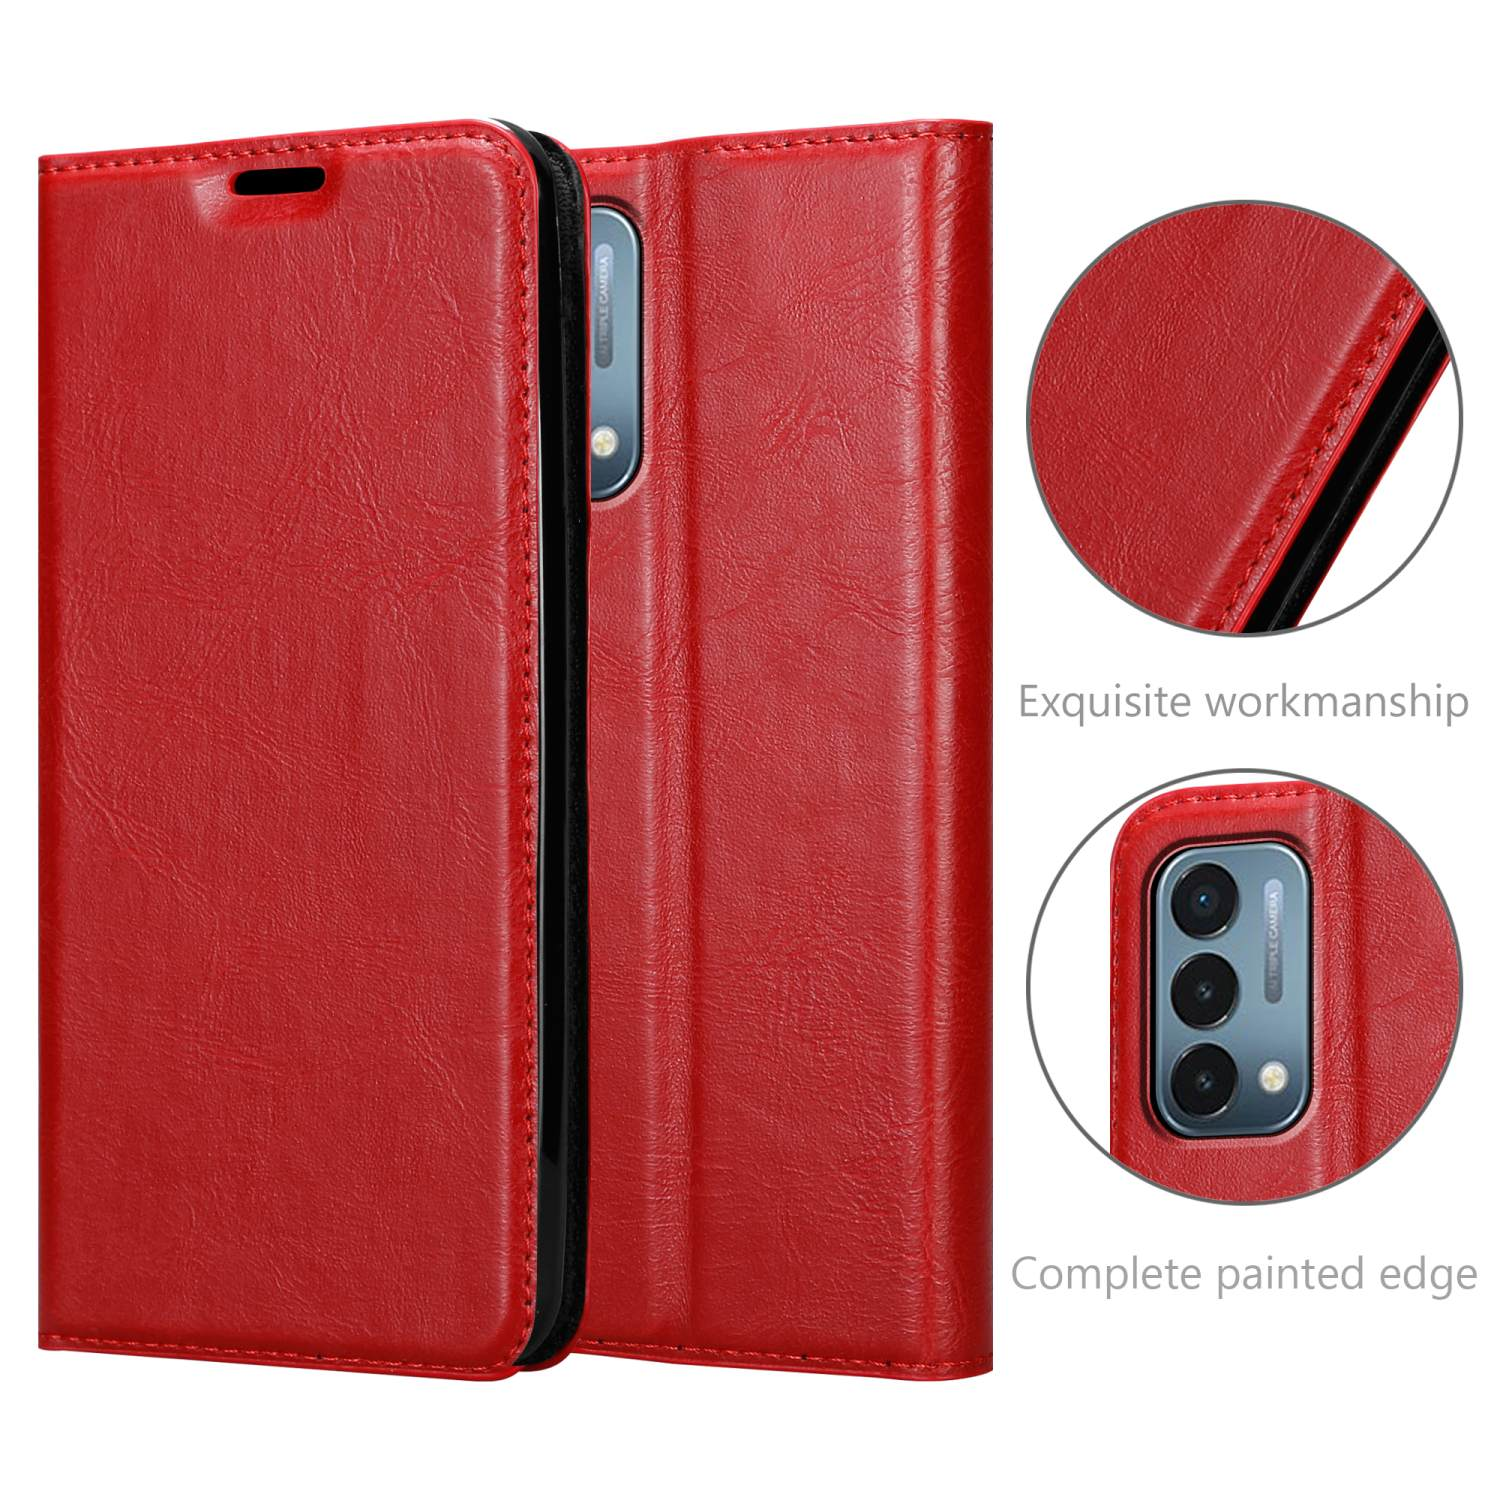 CADORABO N200 Invisible Nord Magnet, 5G, OnePlus, APFEL Hülle Book ROT Bookcover,